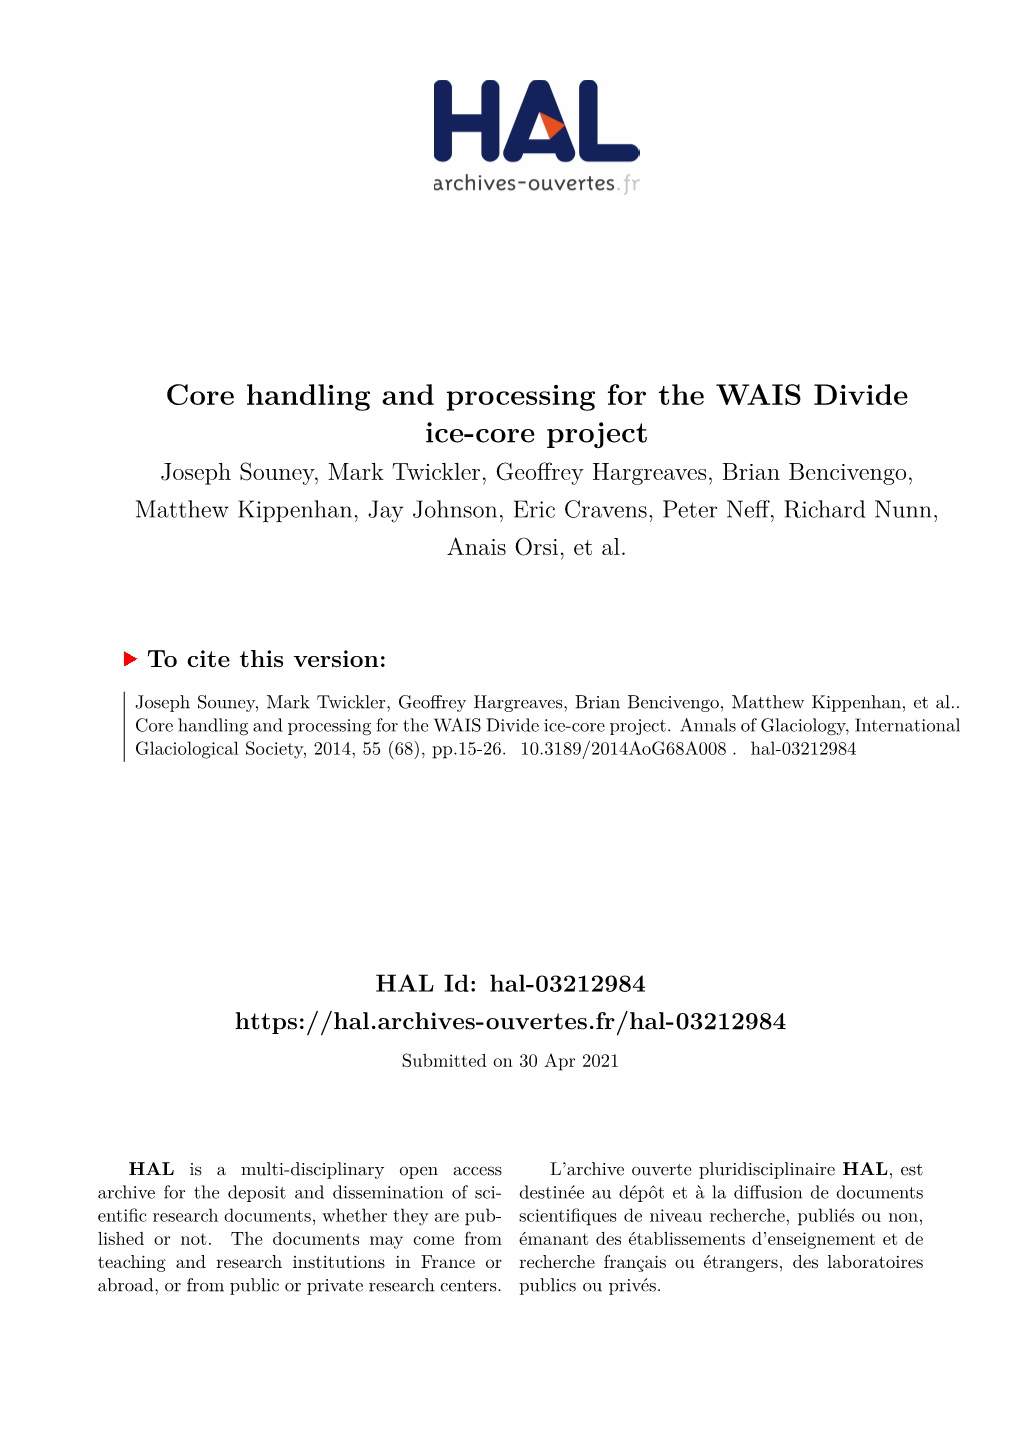 Core Handling and Processing for the WAIS Divide